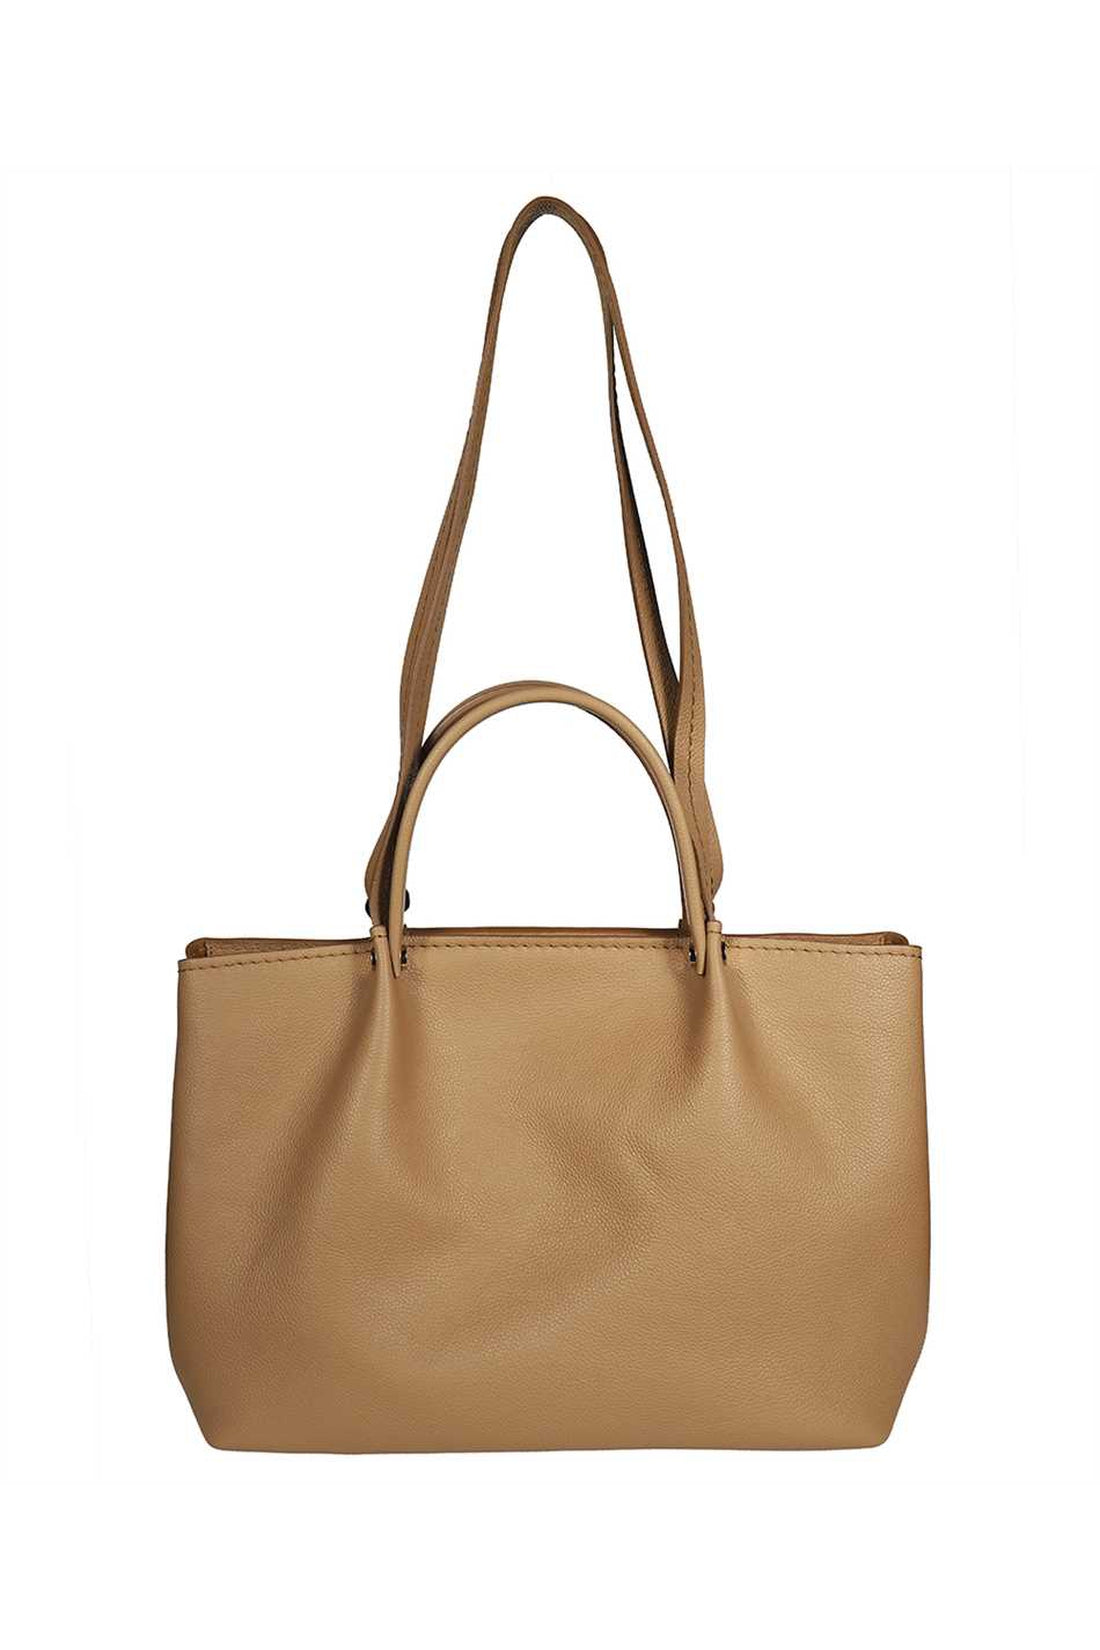 Max Mara-OUTLET-SALE-Leather tote-ARCHIVIST